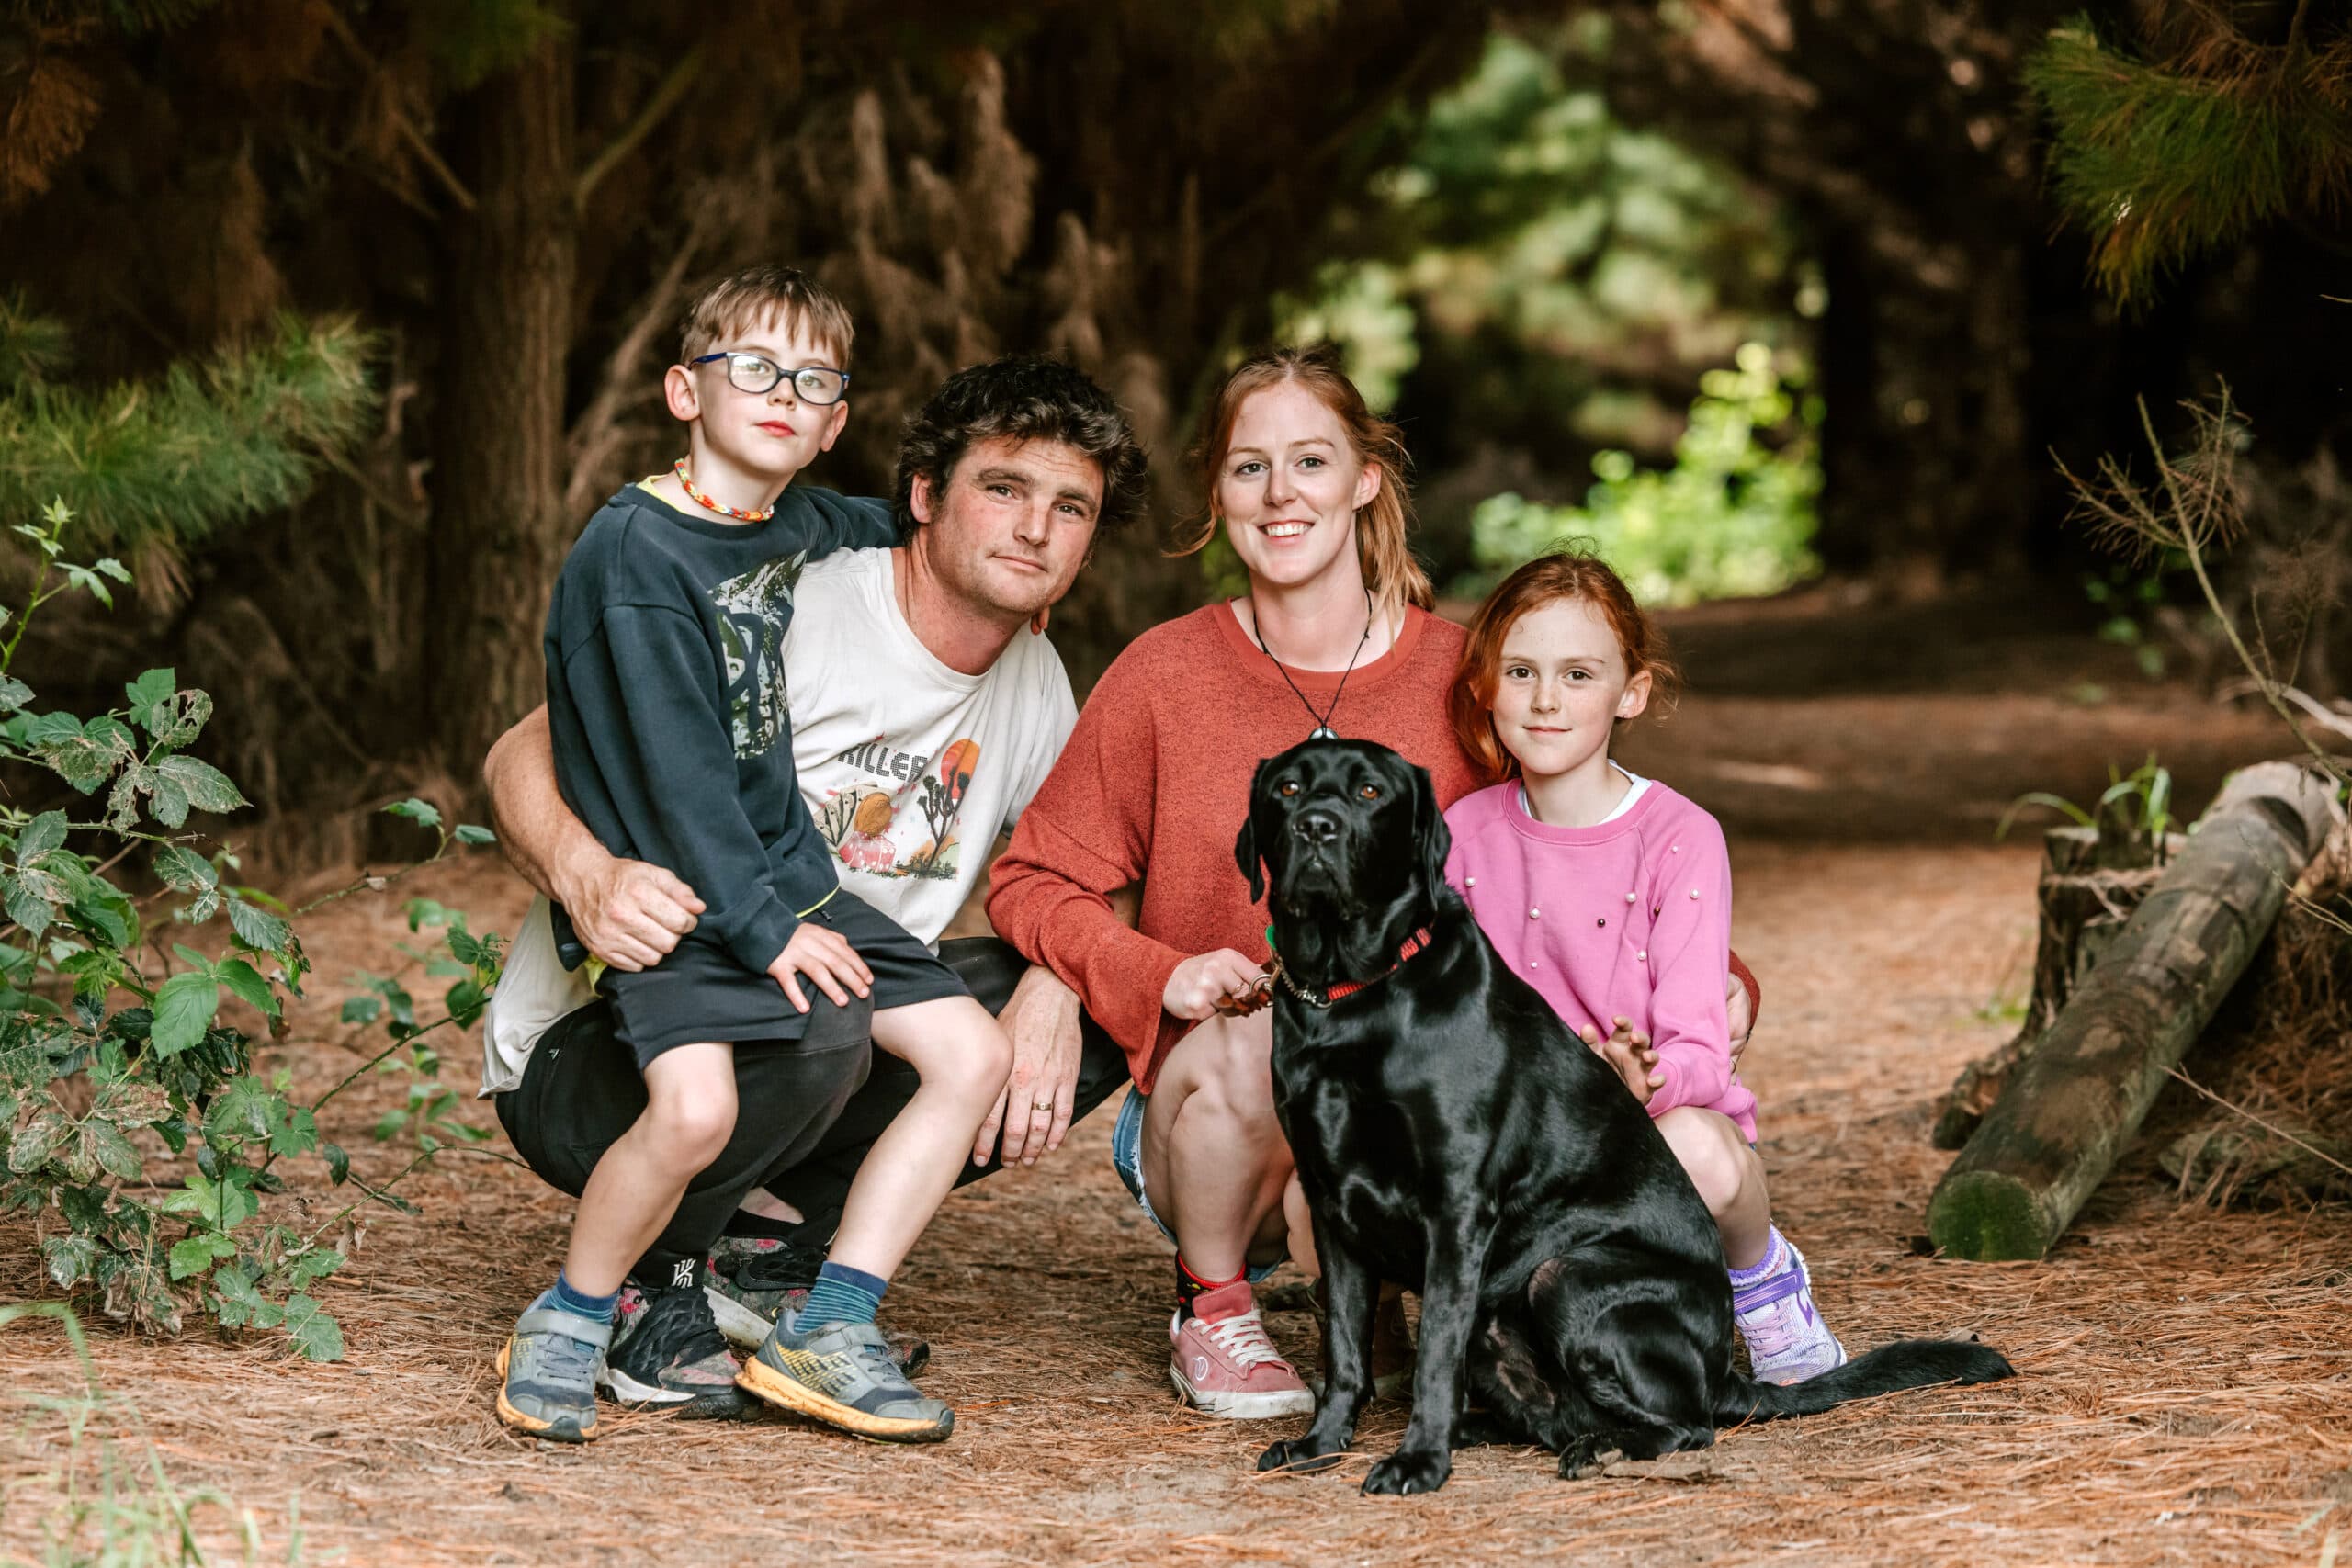 A young family with their two children and black Labrador guide dog, posing for the camera while out for a trek in the woods.